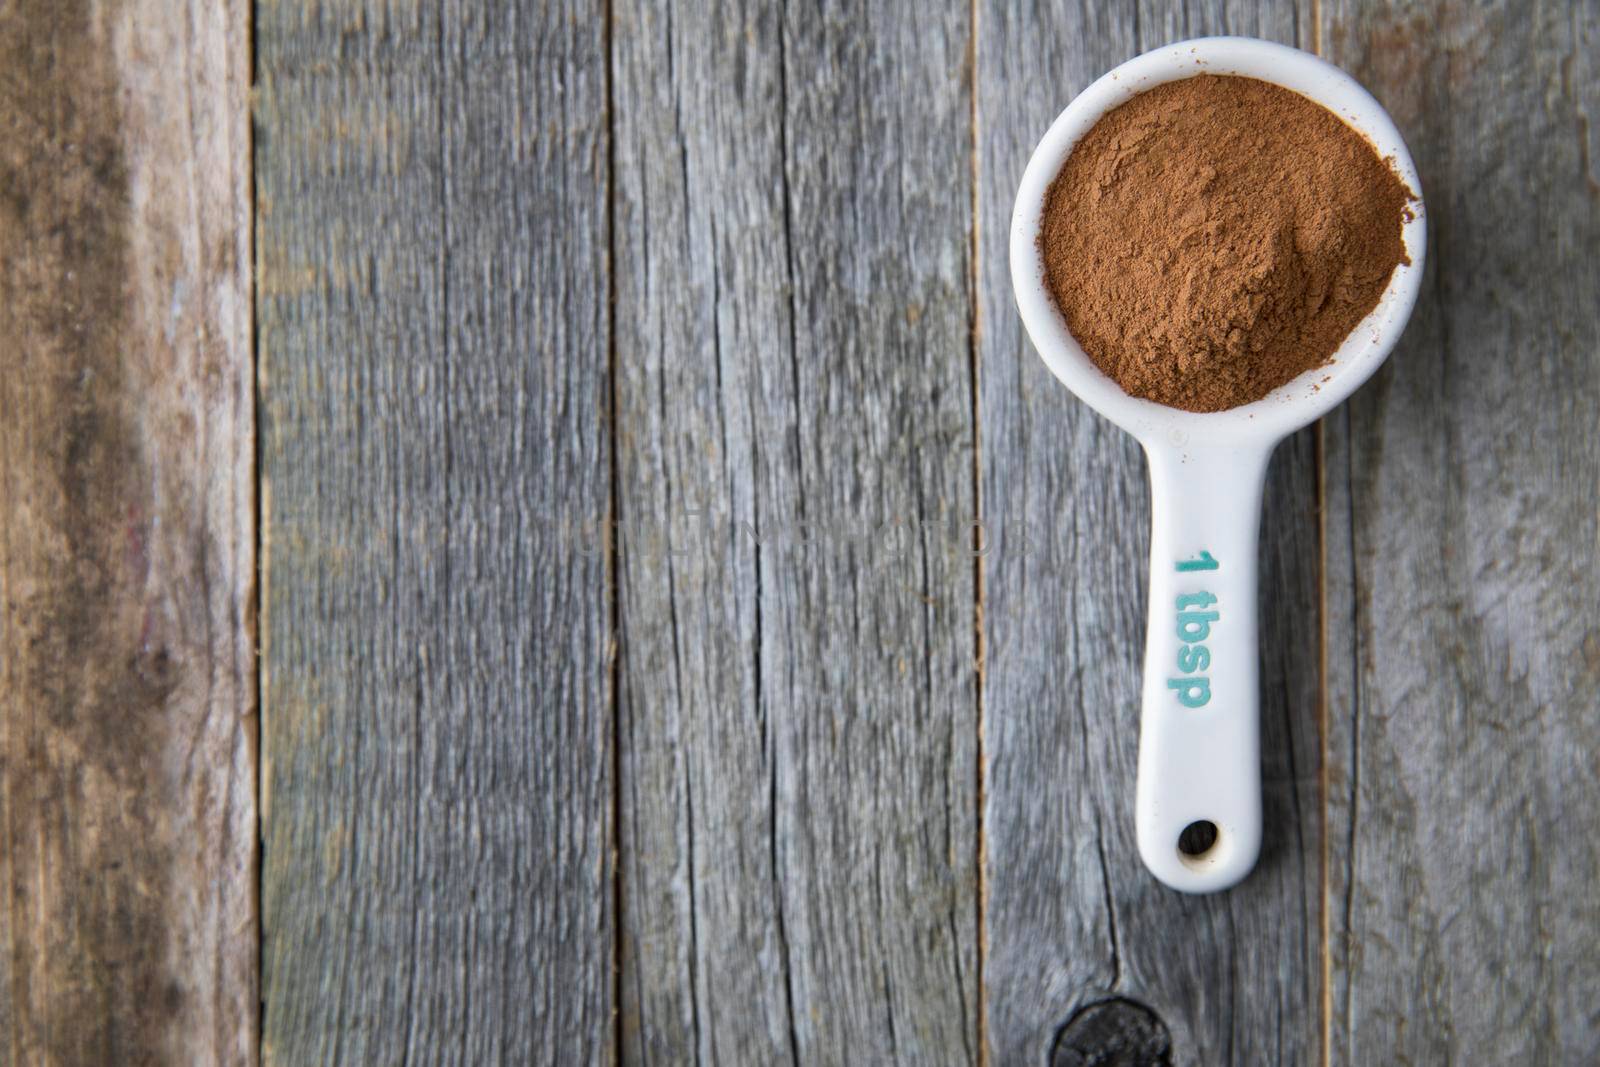 Ground cinnamon in a porcelain tablespoon on a wooden surface with copy space.